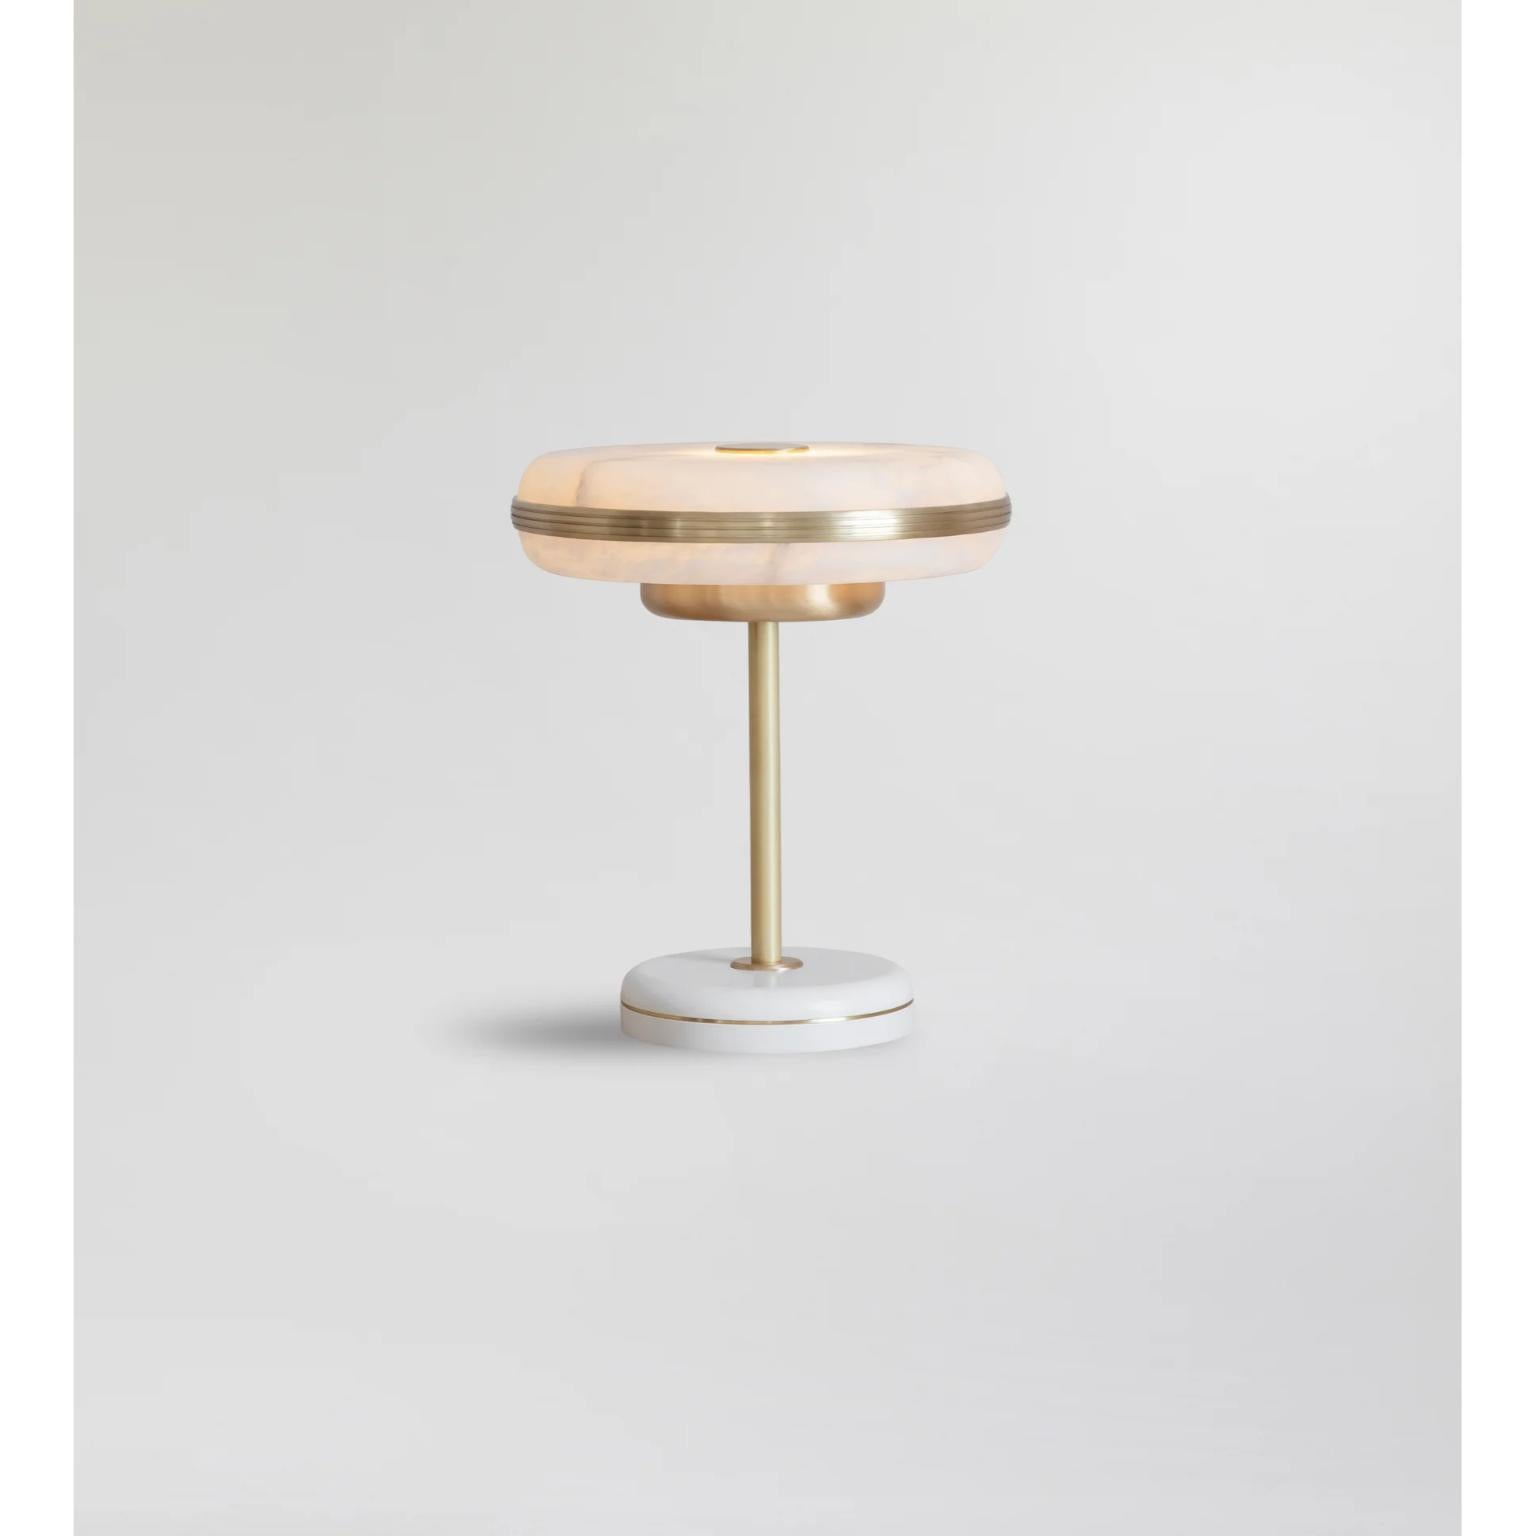 Beran Brushed Brass Small Table Lamp by Bert Frank
Dimensions: Ø 26 x H 28 cm.
Materials: Brass and alabaster.
Base finish: Satin white.

Available in two different sizes. Available in different finishes and materials. Please contact us. 

The